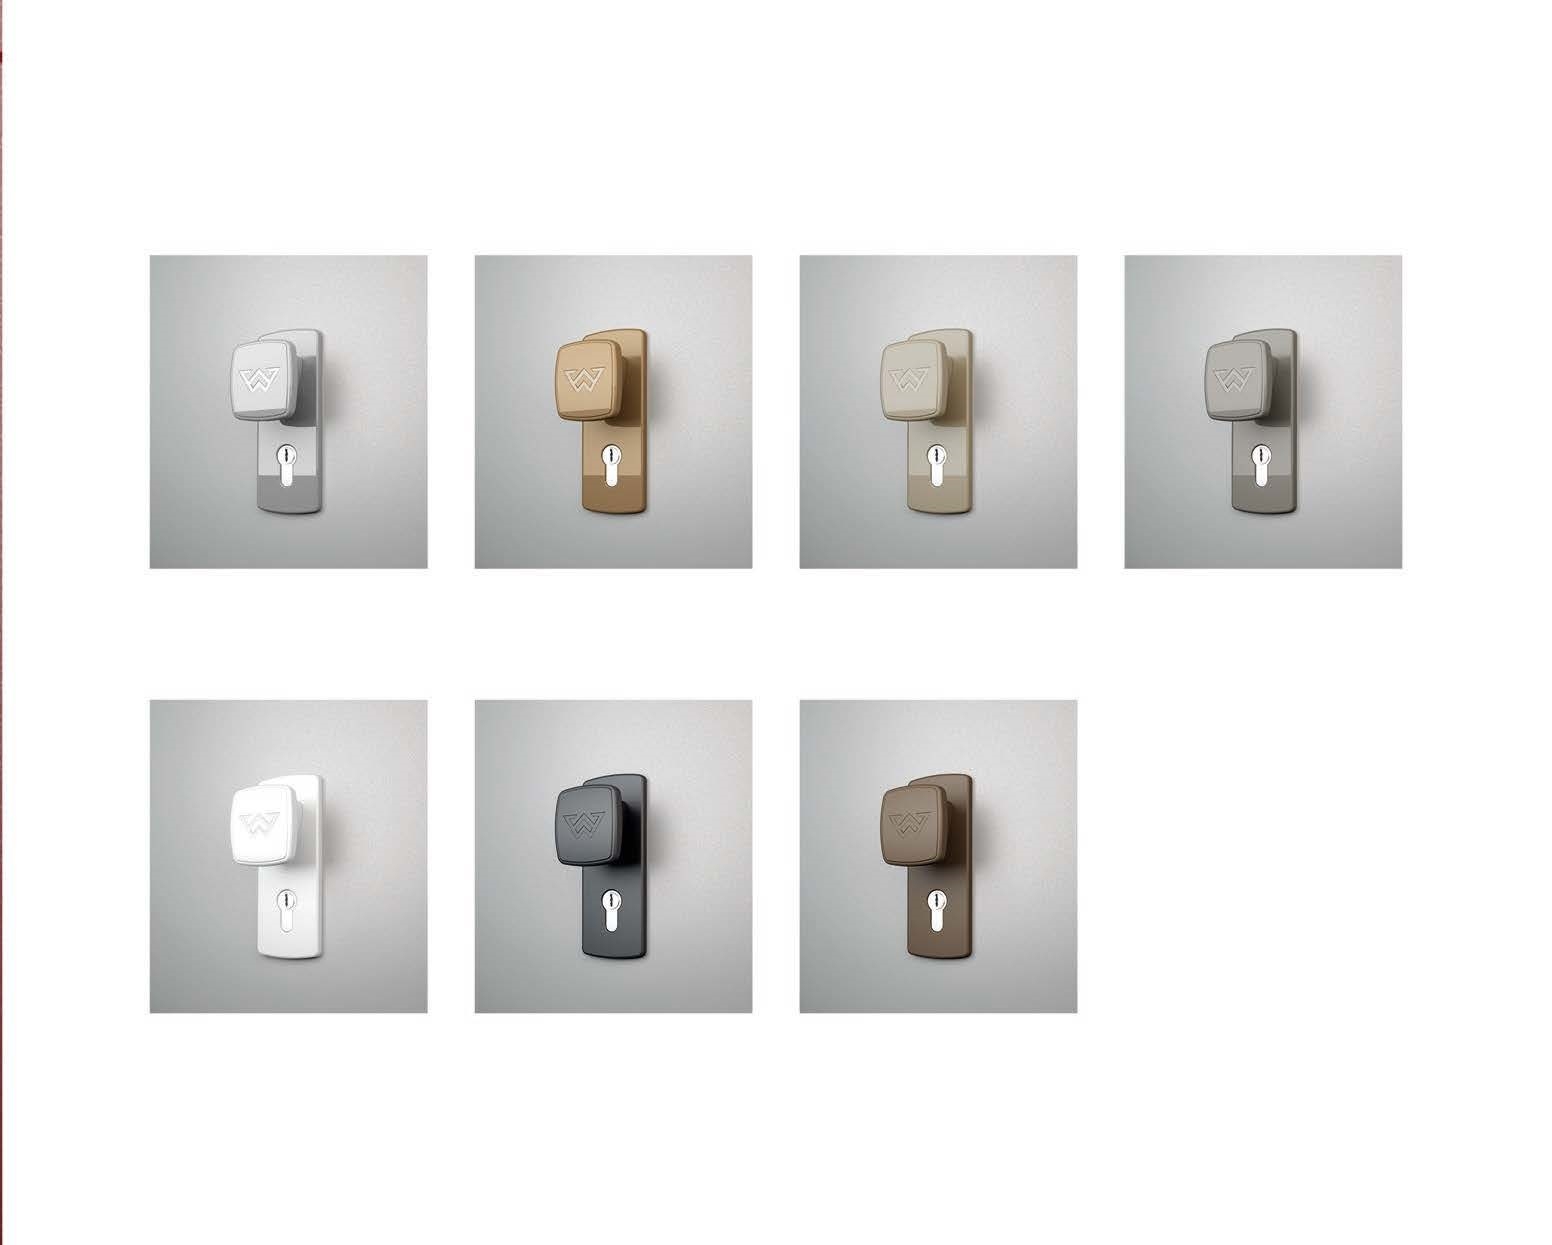 Range of handles available for the manual door